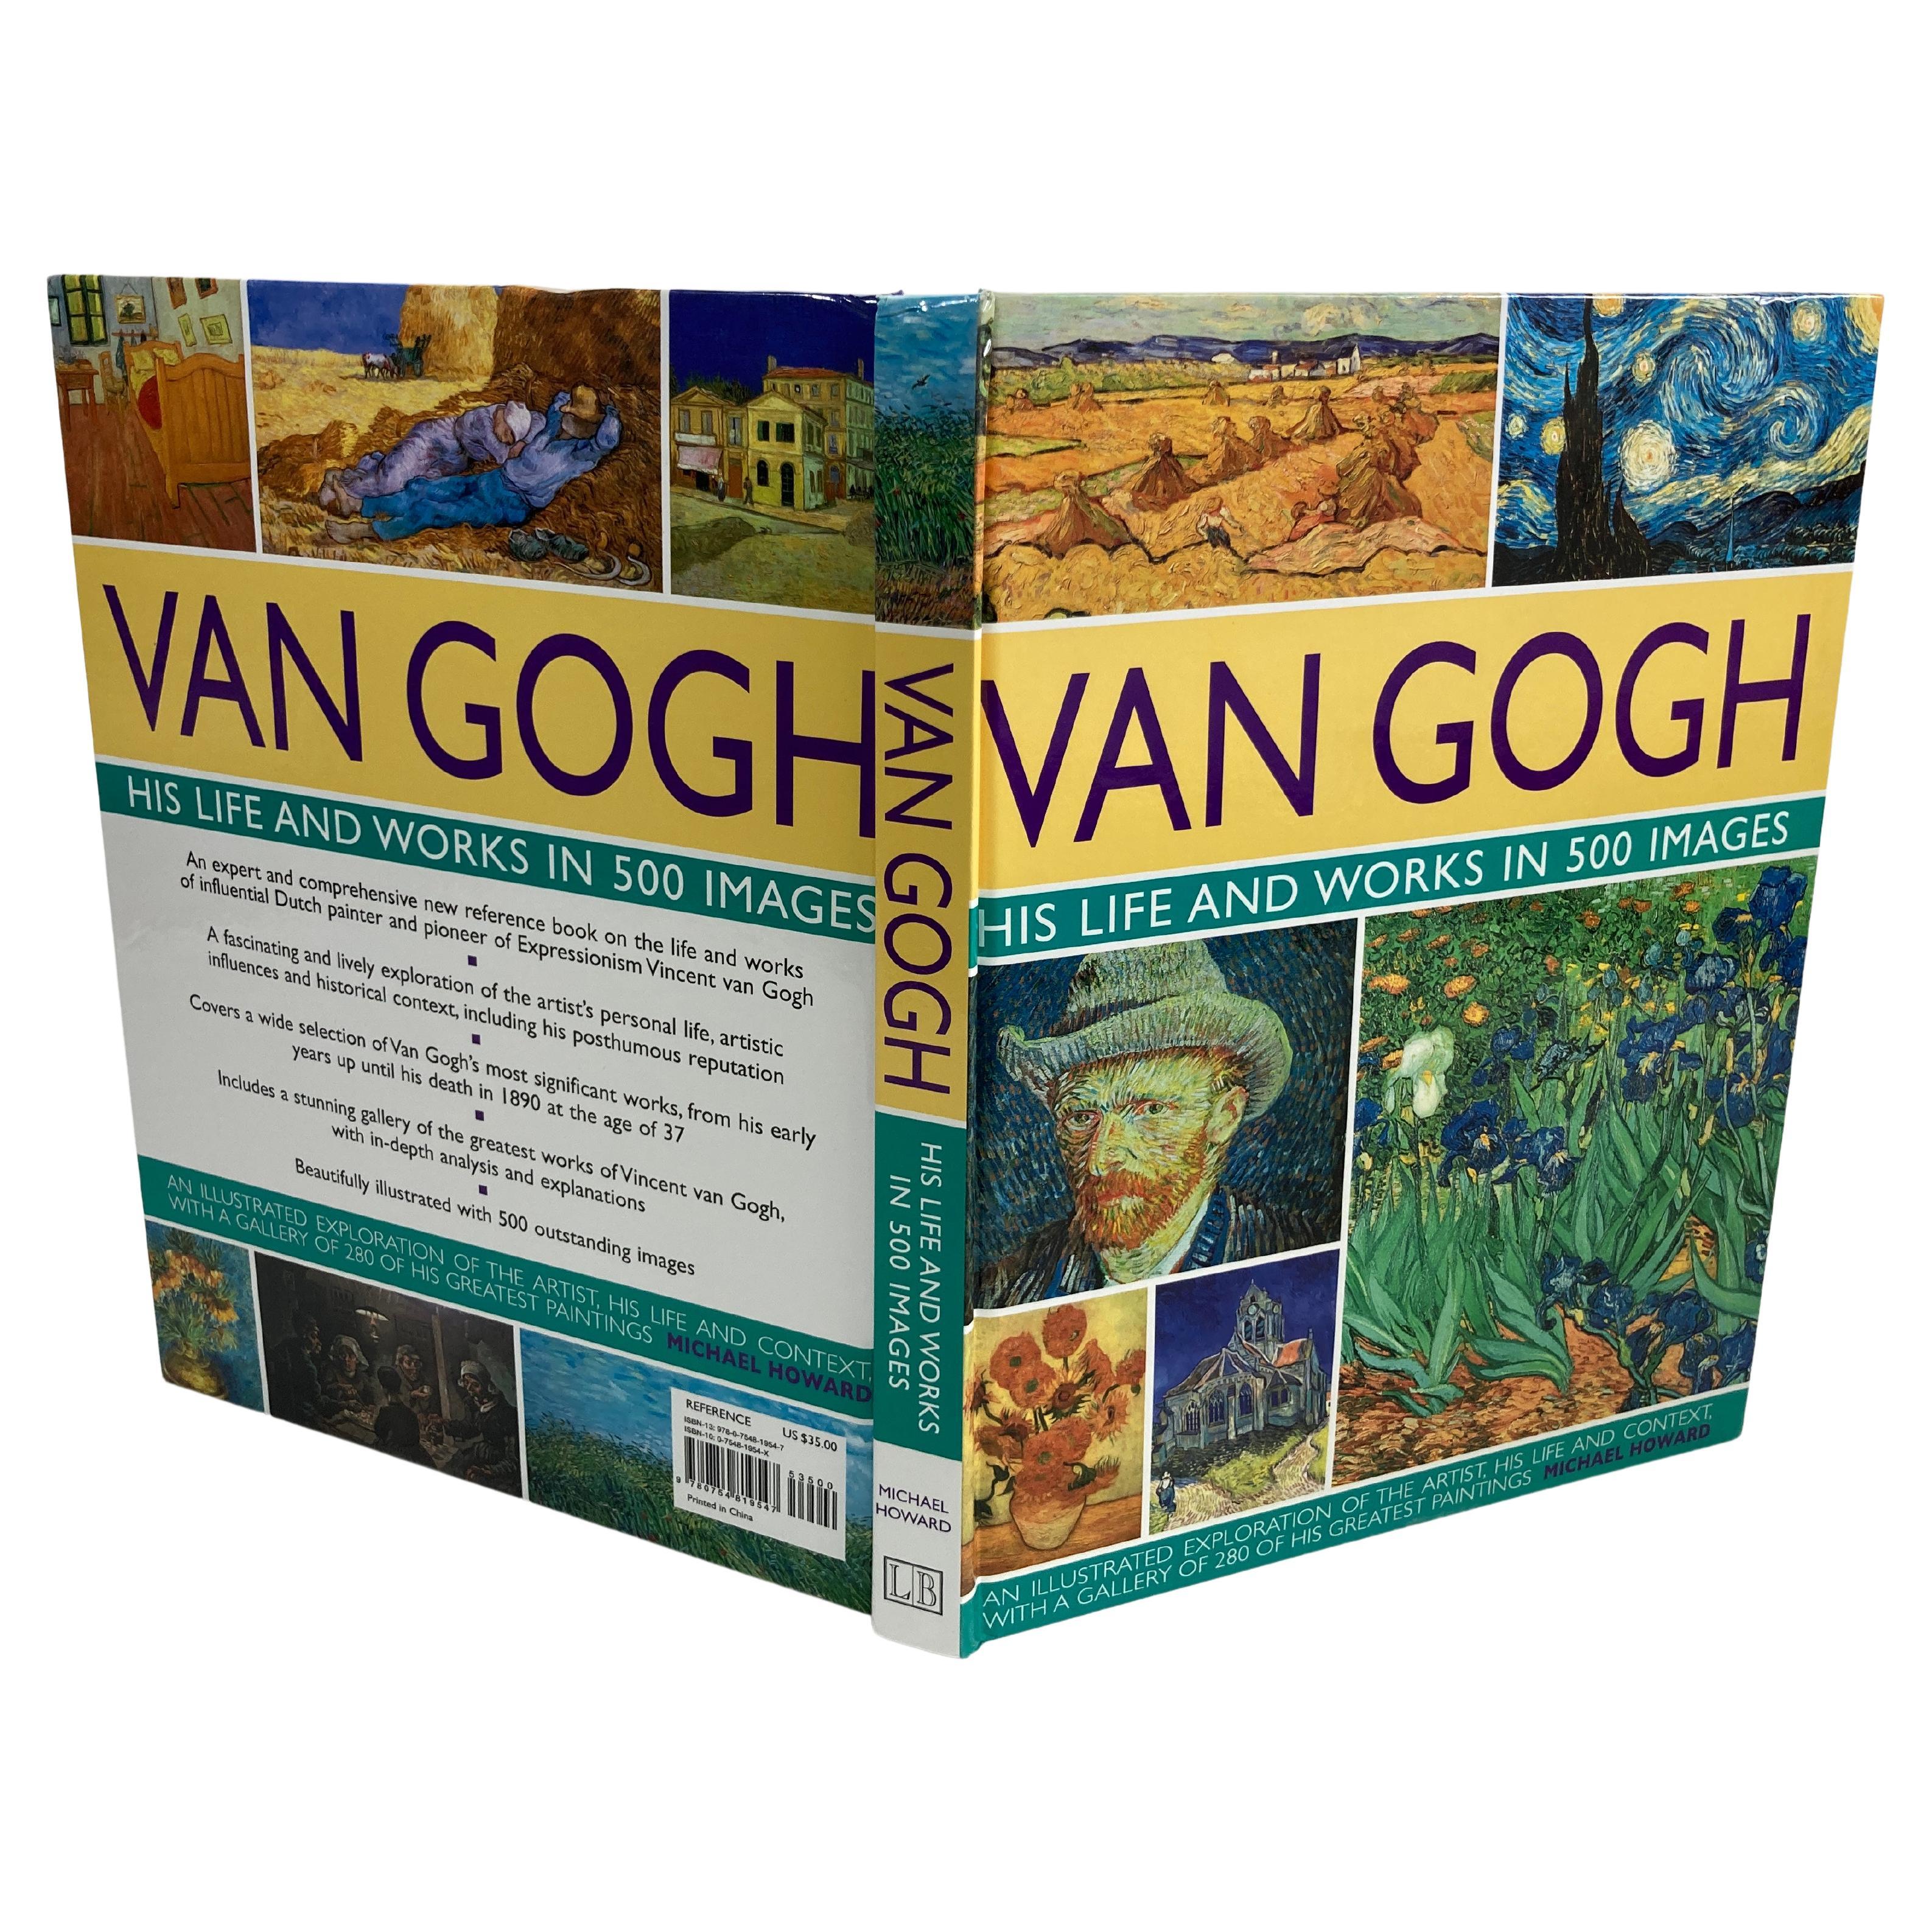 Van Gogh: His Life and Works in 500 Images
Book by Michael Howard and Vincent van Gogh.
